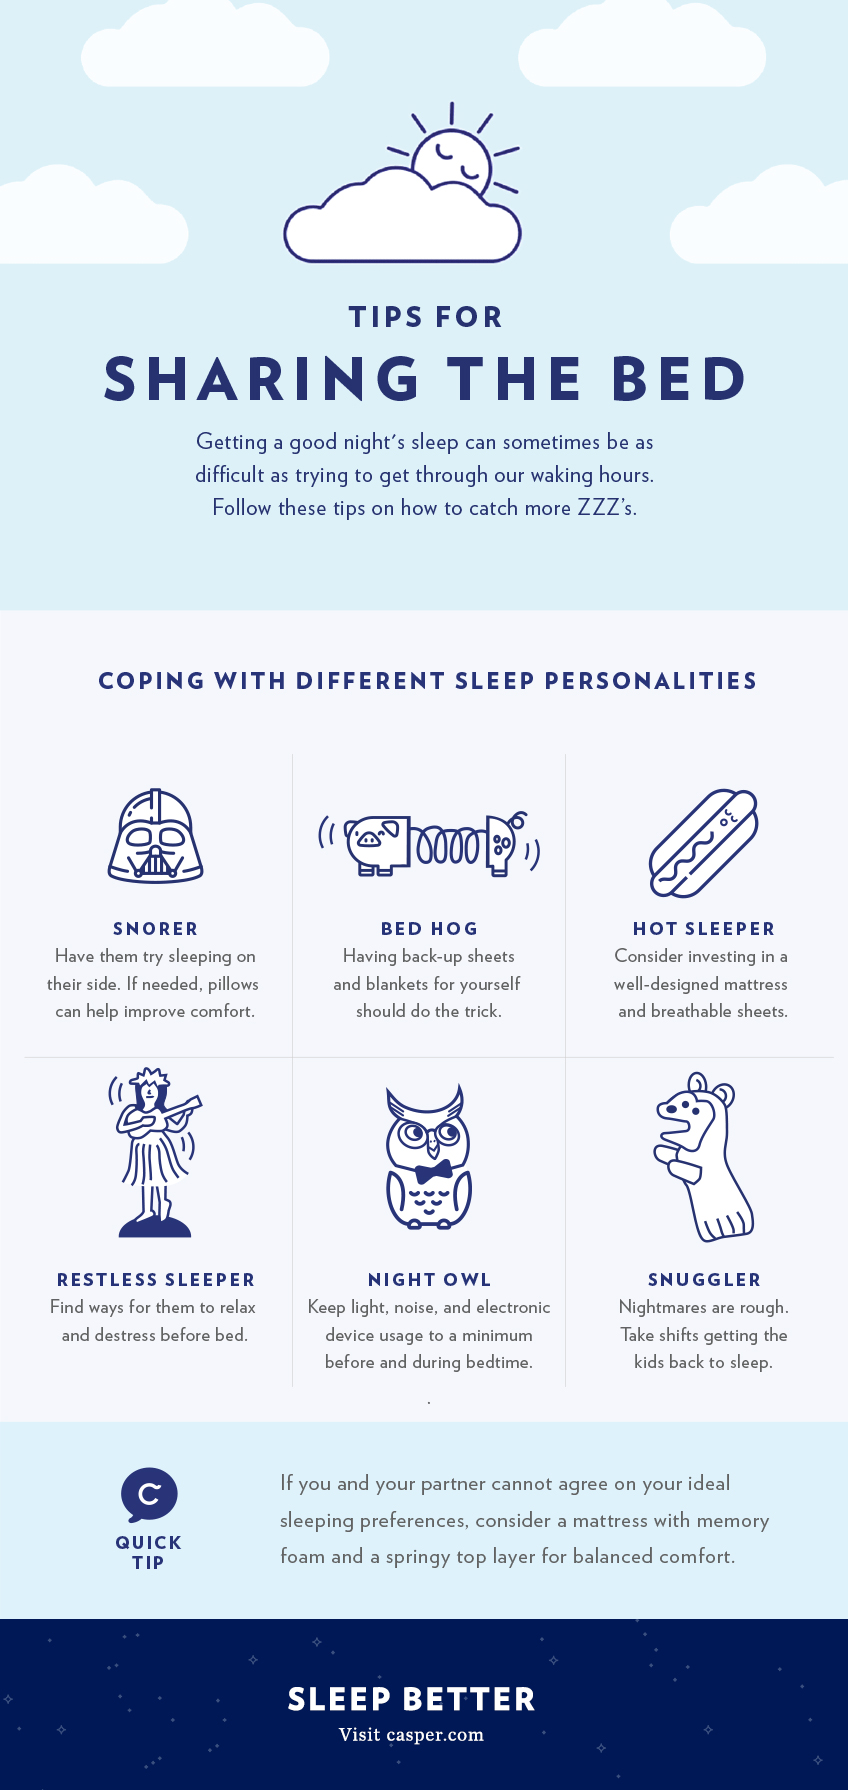 Sharing The Bed With A New Partner? Here’s How To Cope With The 6 Most Common Sleep Personalities